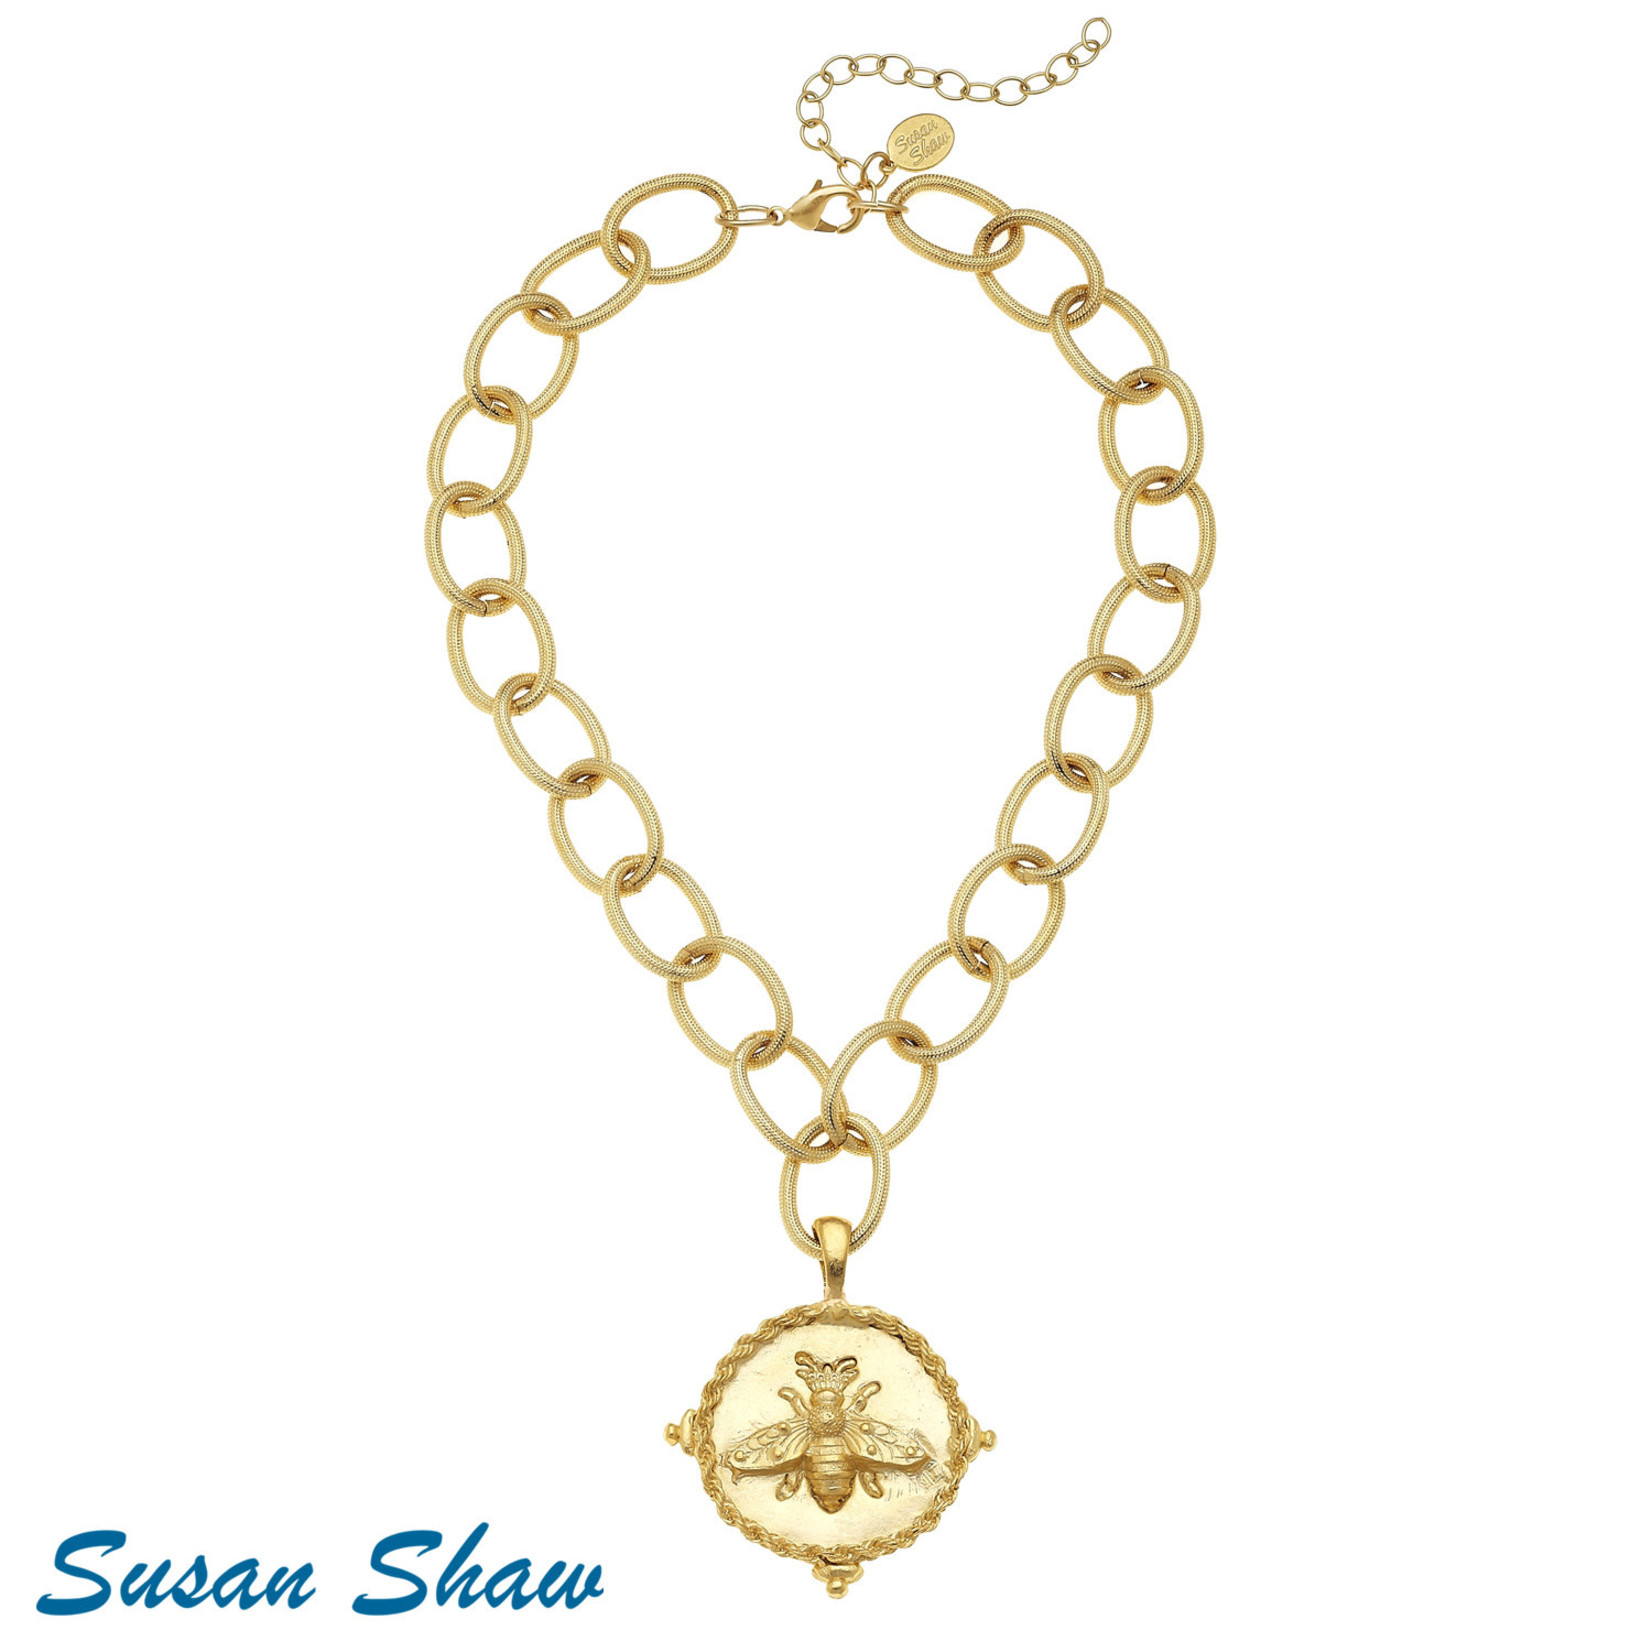 Susan Shaw Susan Shaw Gold Bee Pendant on Loop Chain Necklace